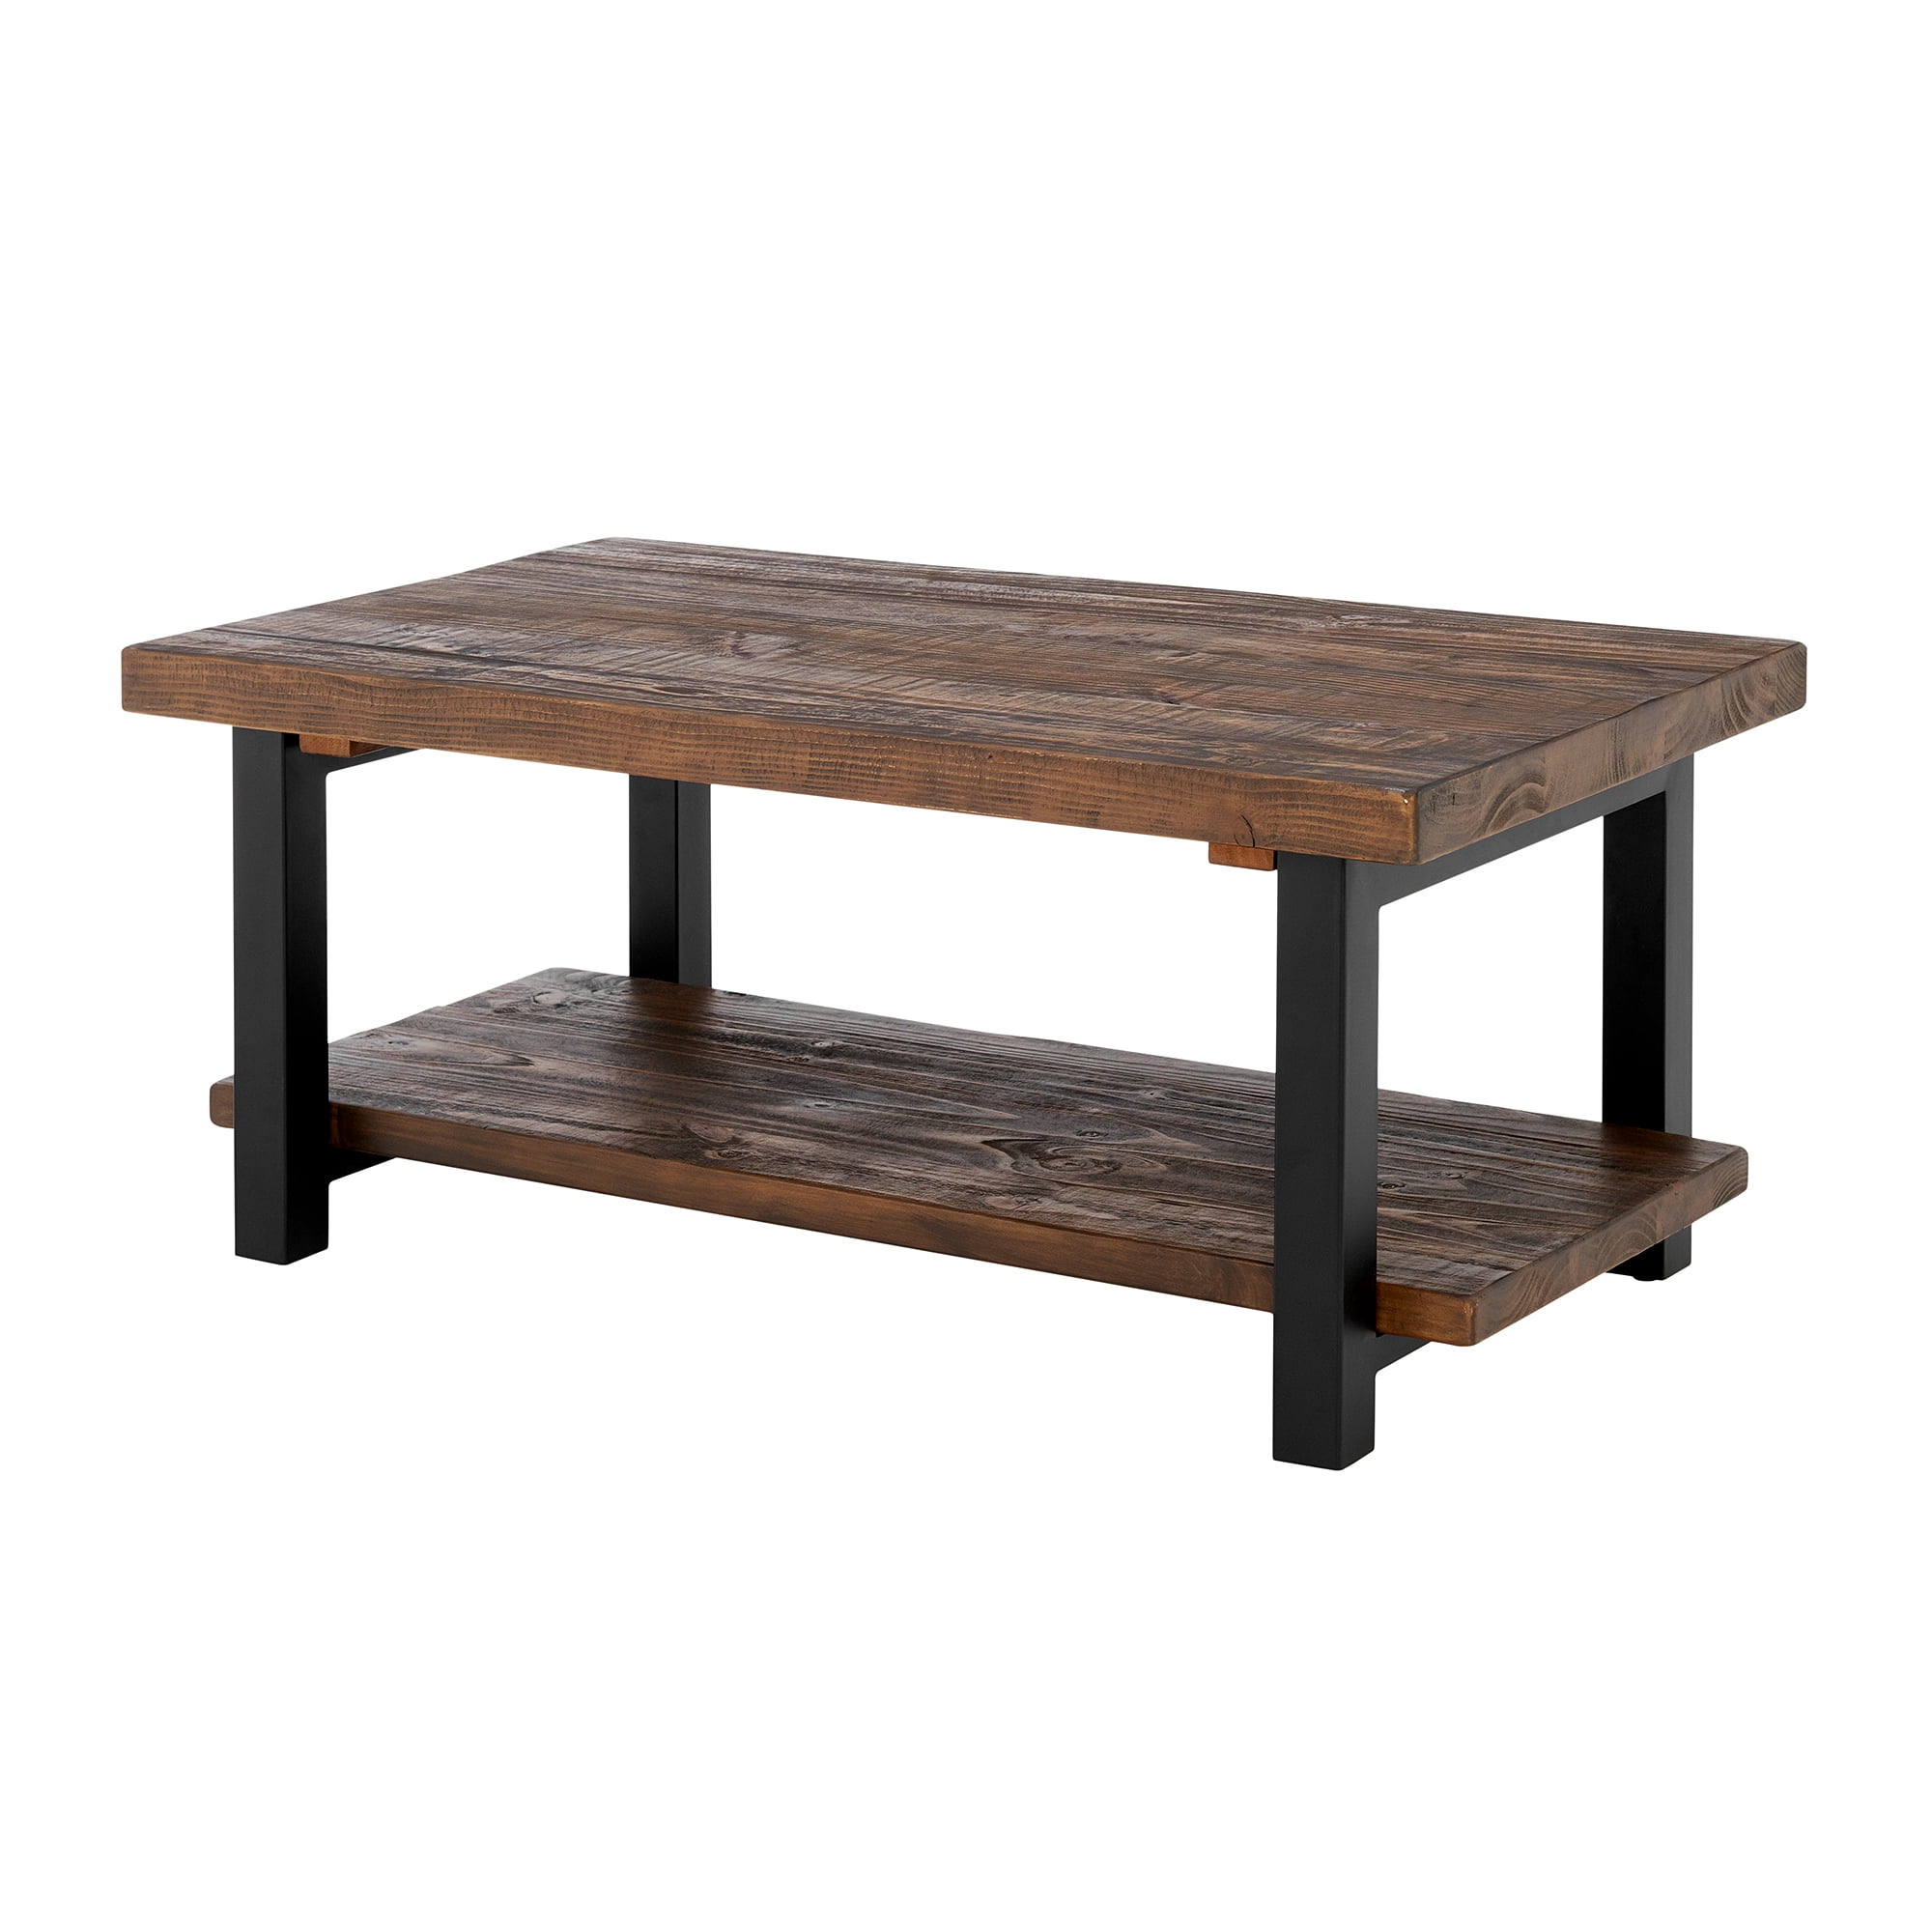 SOLID WOOD RUSTIC FARMHOUSE COTTAGE COFFEE TABLE DESK TOP ONLY HANDMADE sizes 